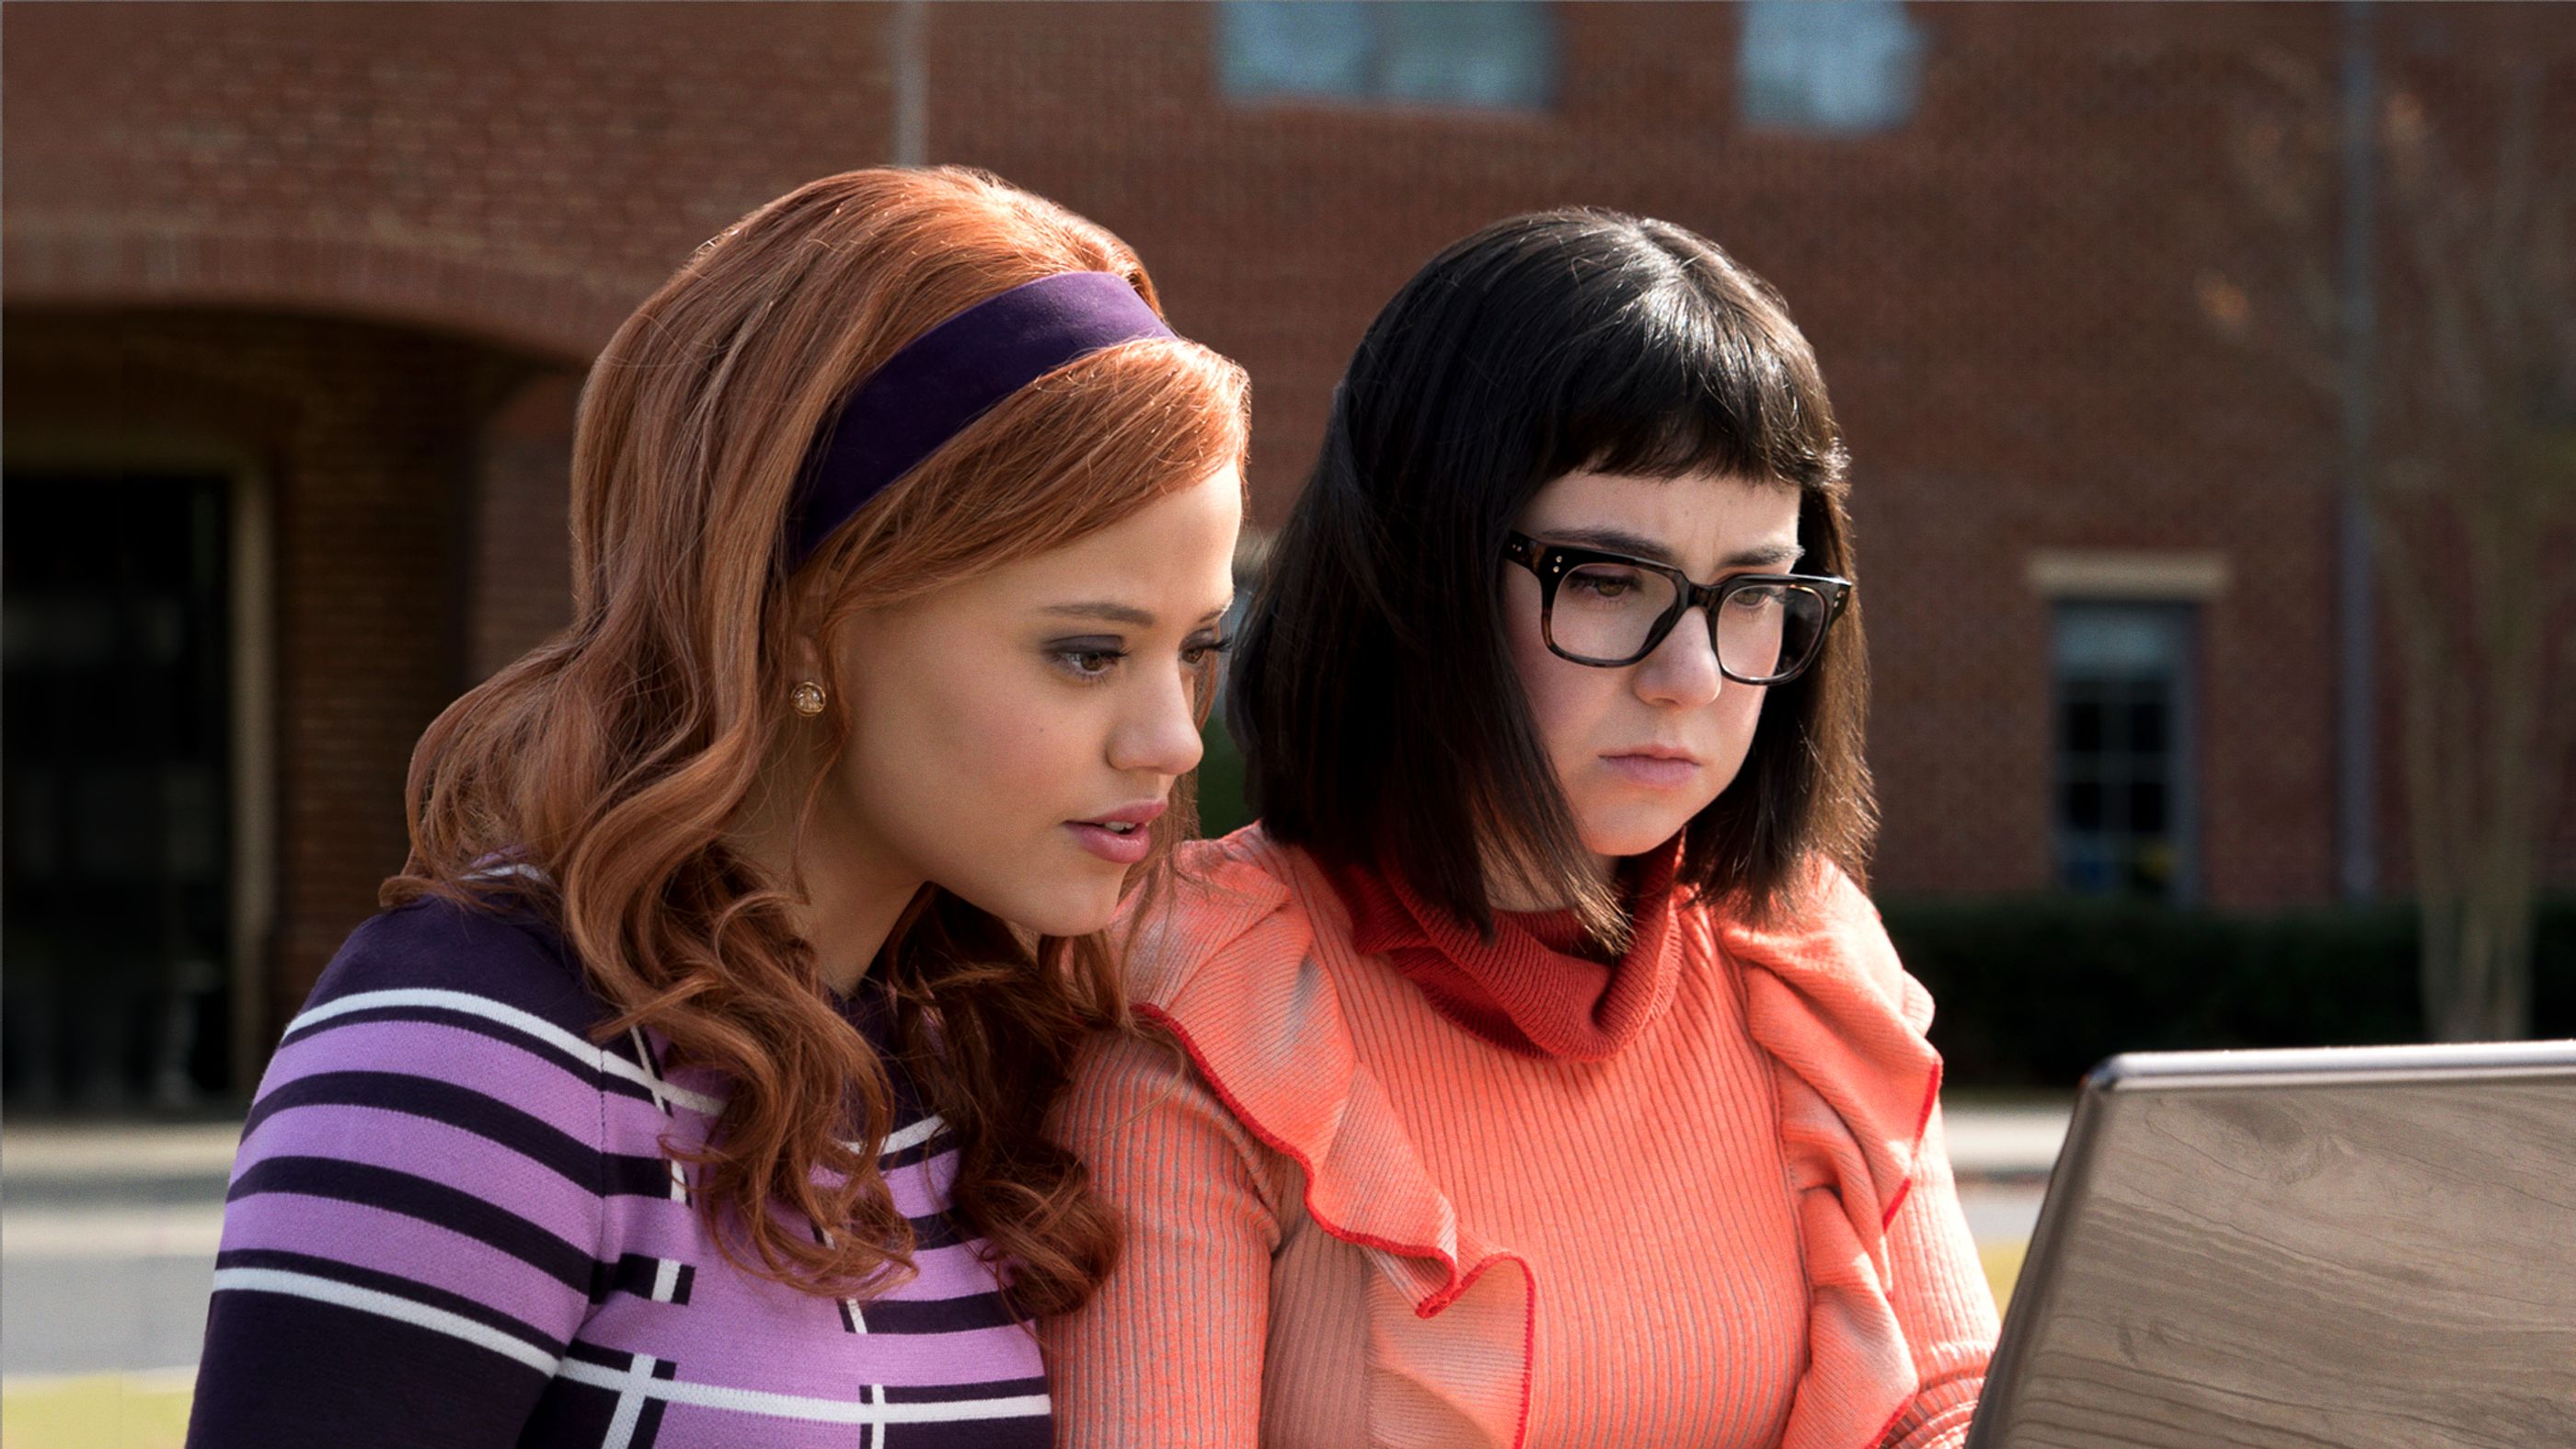 Daphne & Velma wins with style and science